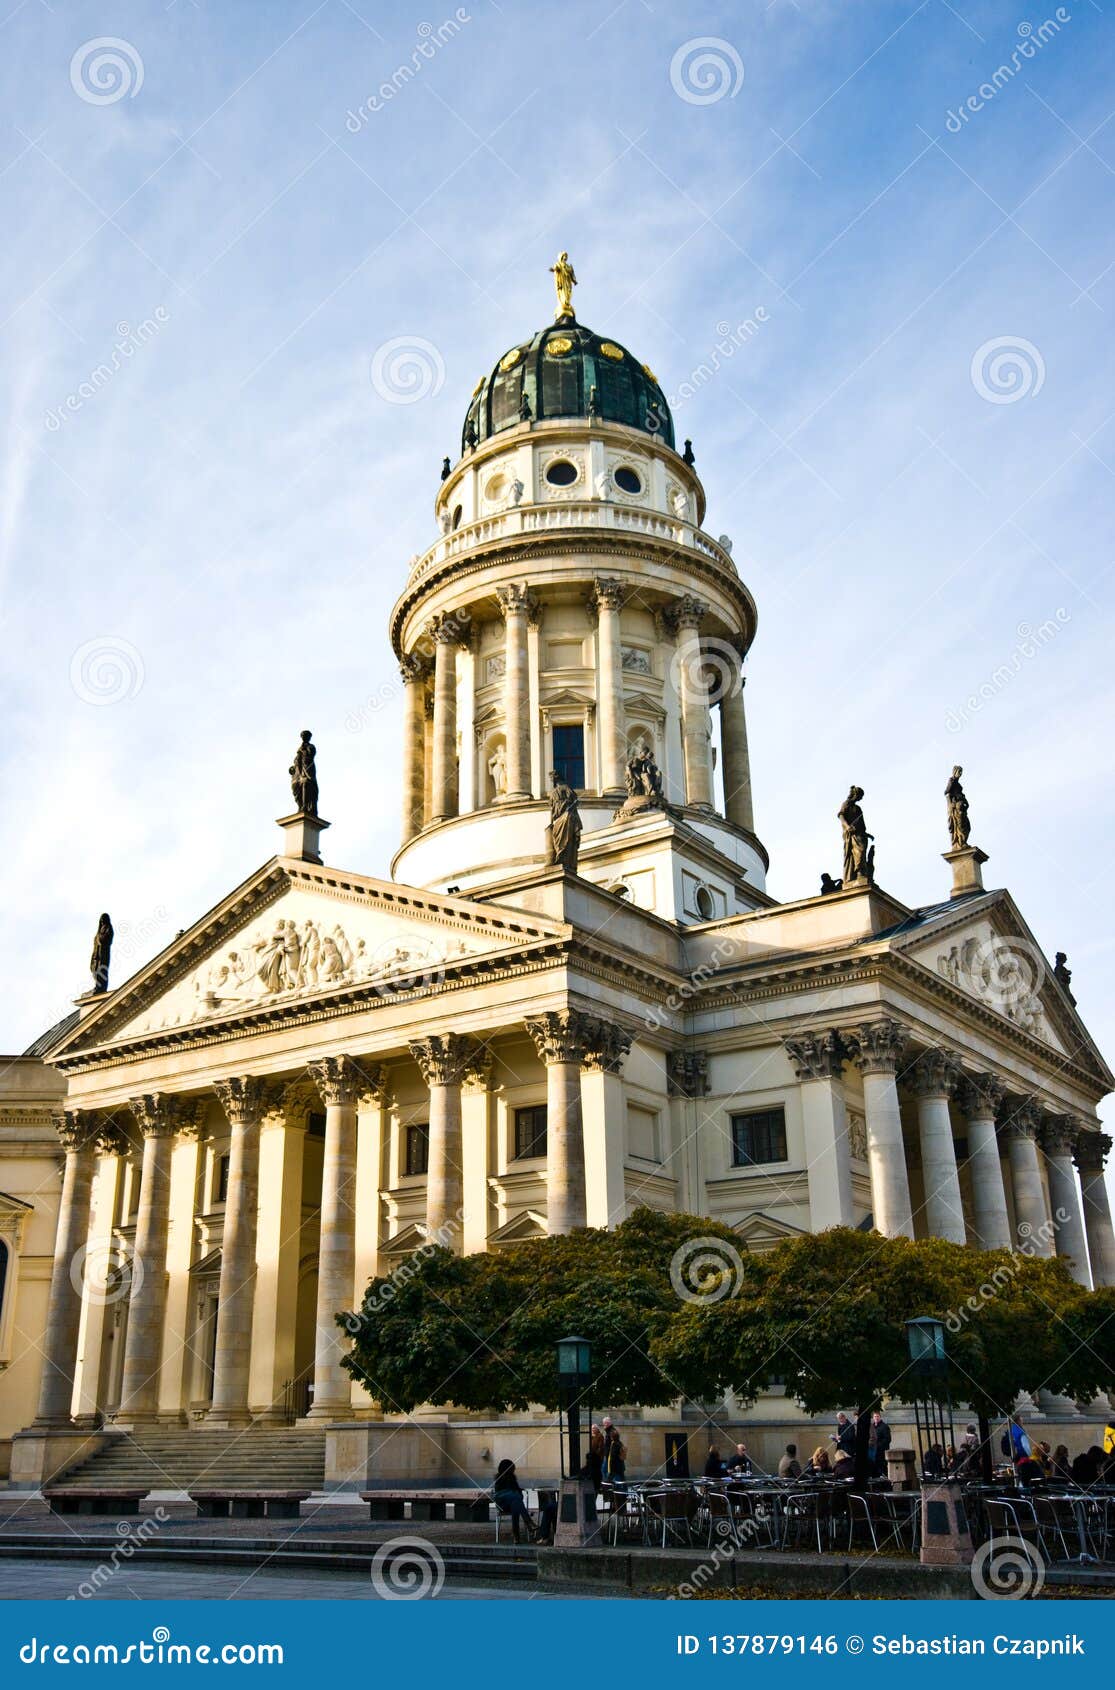 Cath drale Allemagne De Berlin  French Dom  Photo stock 